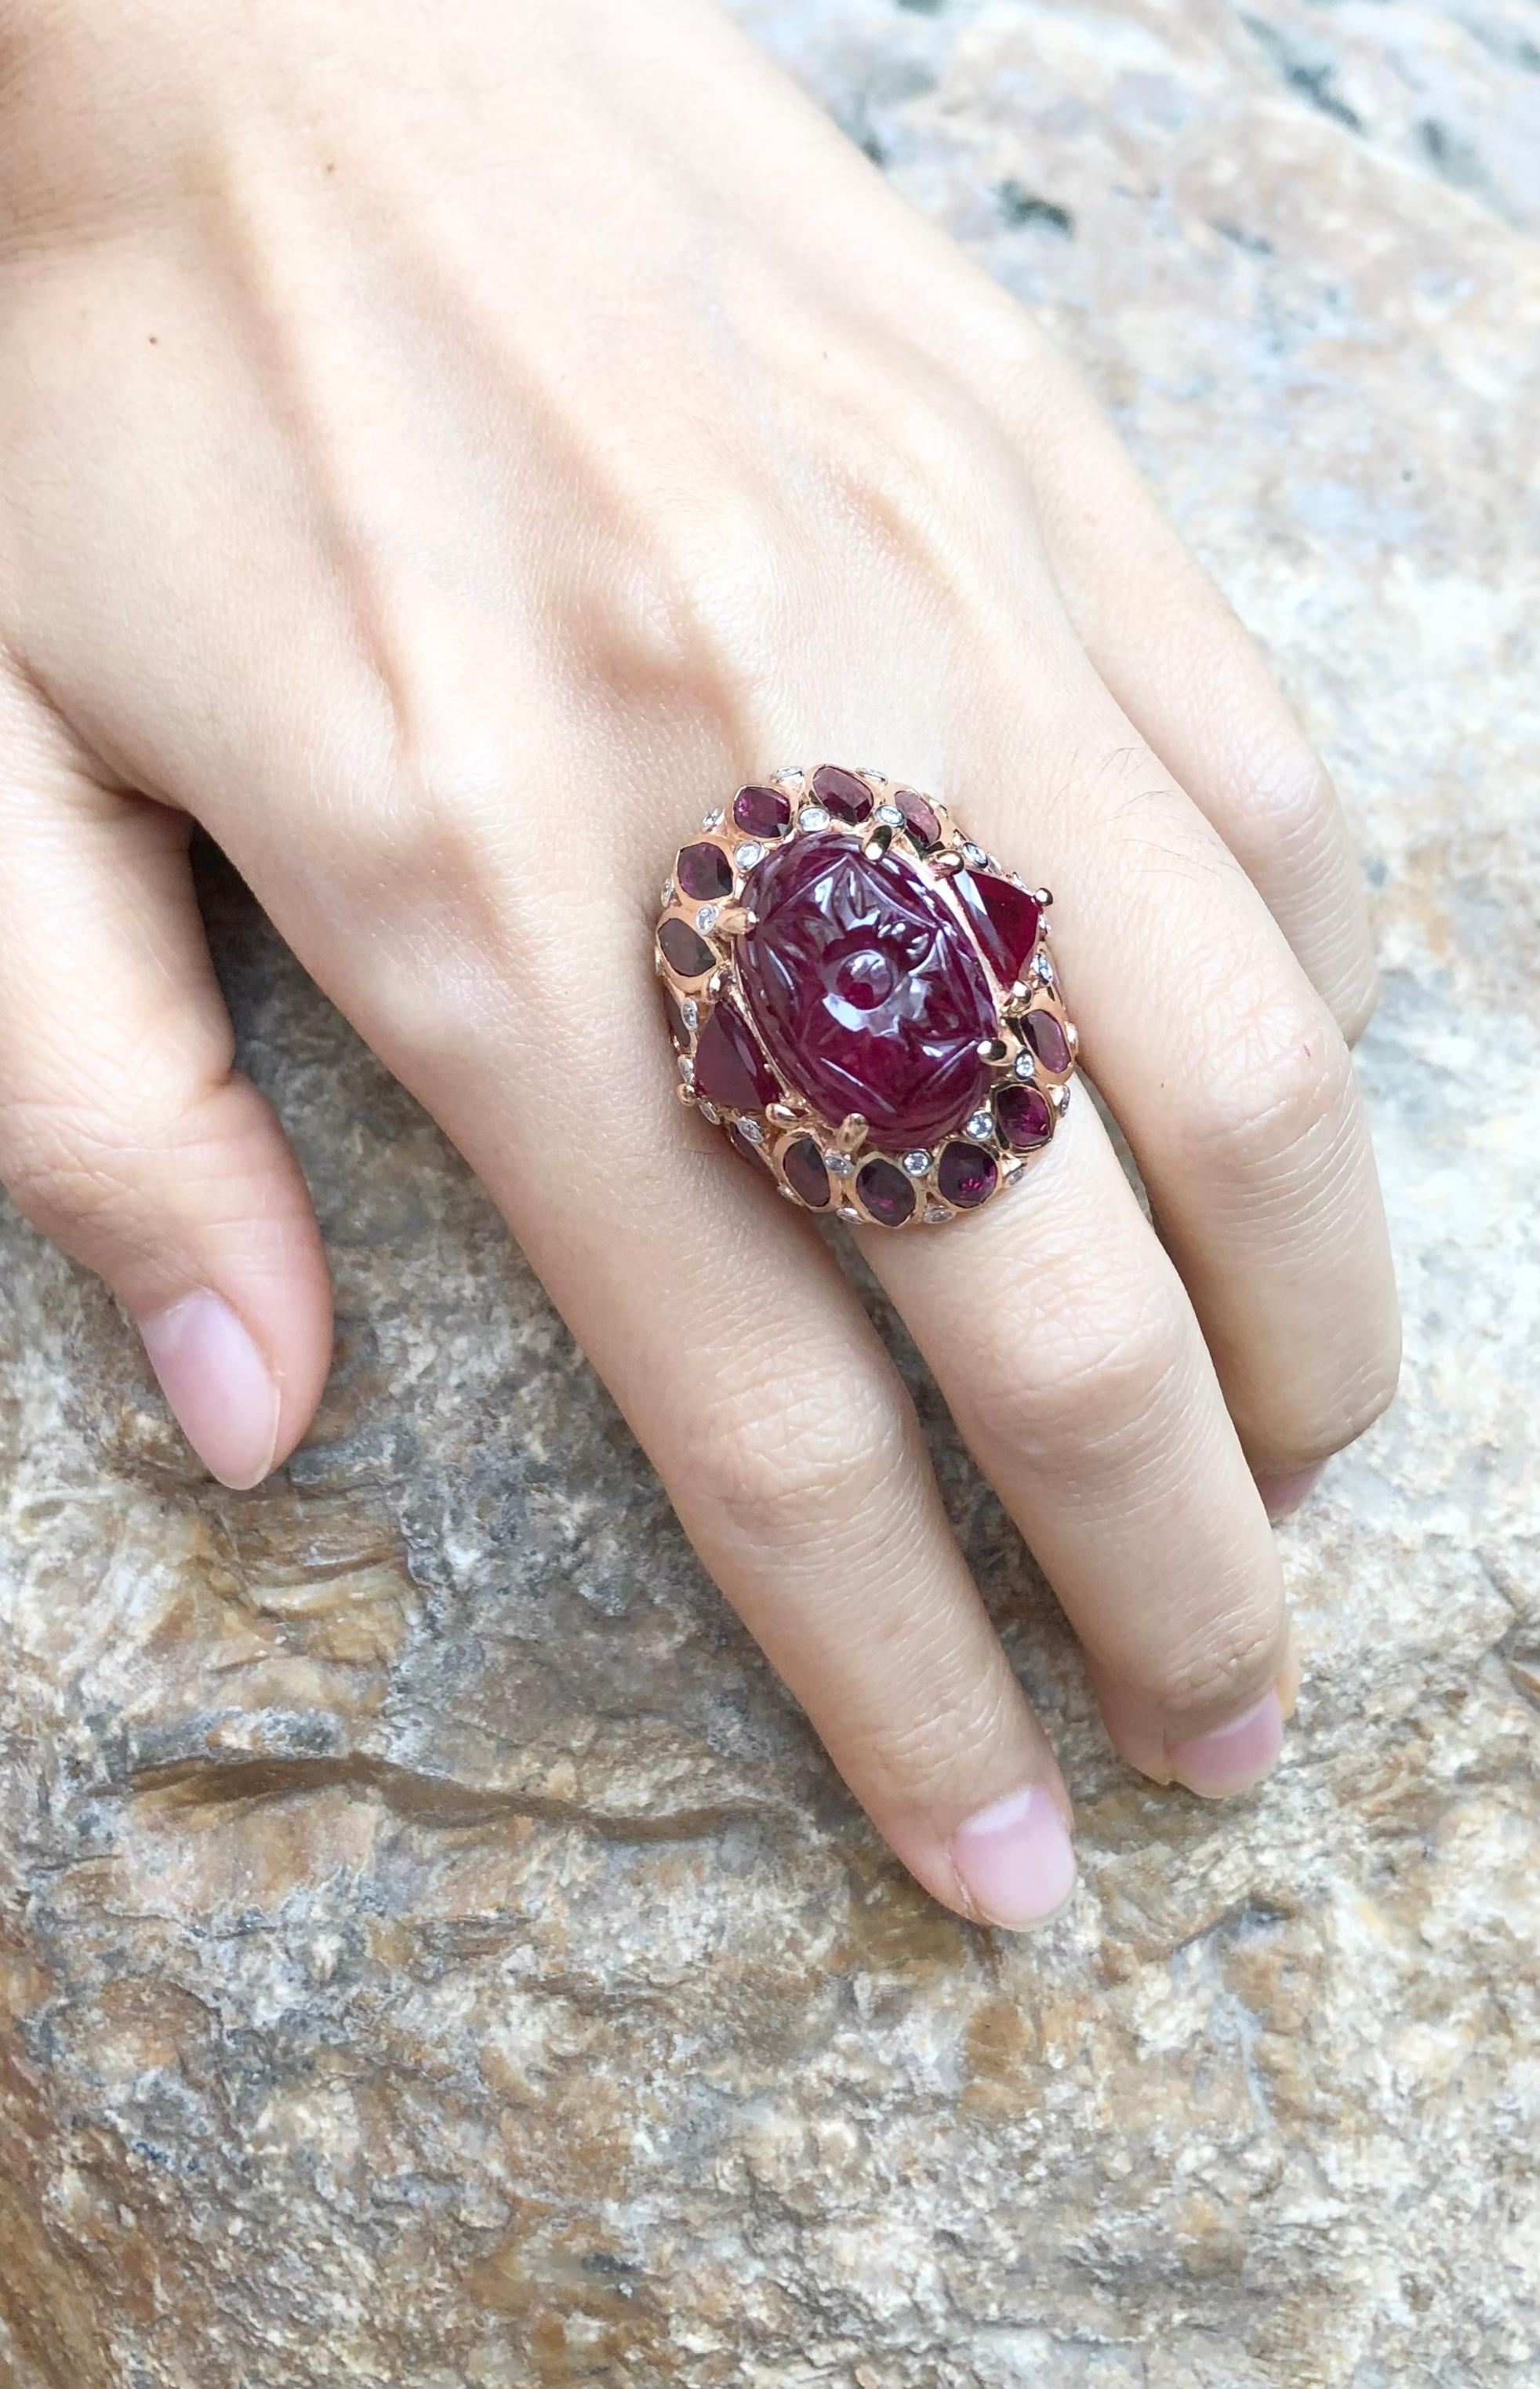 Cabochon Ruby 18.58 carats with Ruby 12.21 carats and Diamond 0.36 carat Ring set 18 Karat Rose Gold Settings
(GIA Certified)

Width:  2.7 cm 
Length: 2.9 cm
Ring Size: 56
Total Weight: 28.08 grams

